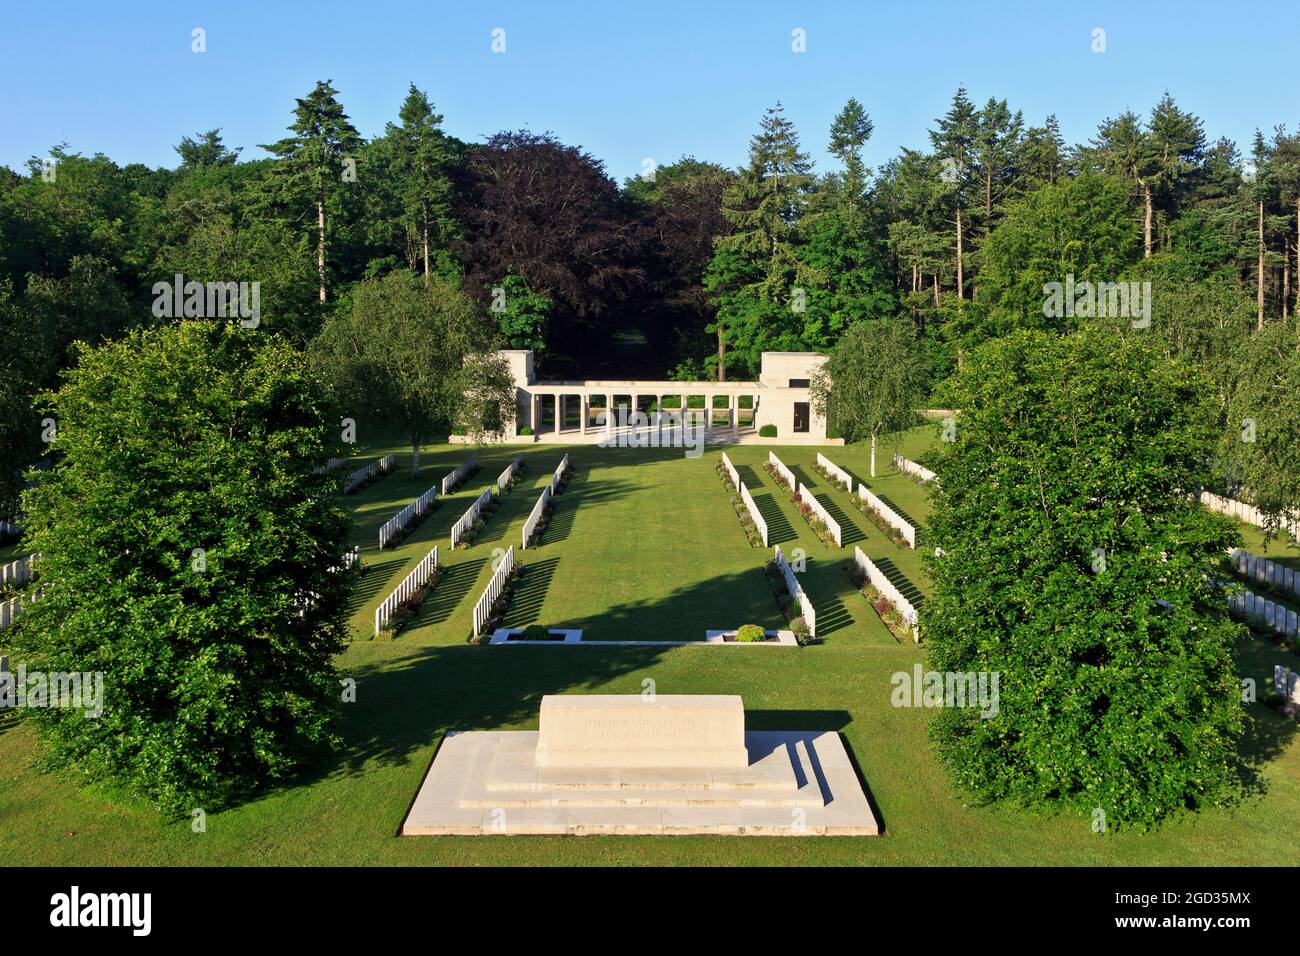 The First World War New Zealand Memorial at Buttes New British Cemetery in Zonnebeke, Belgium Stock Photo